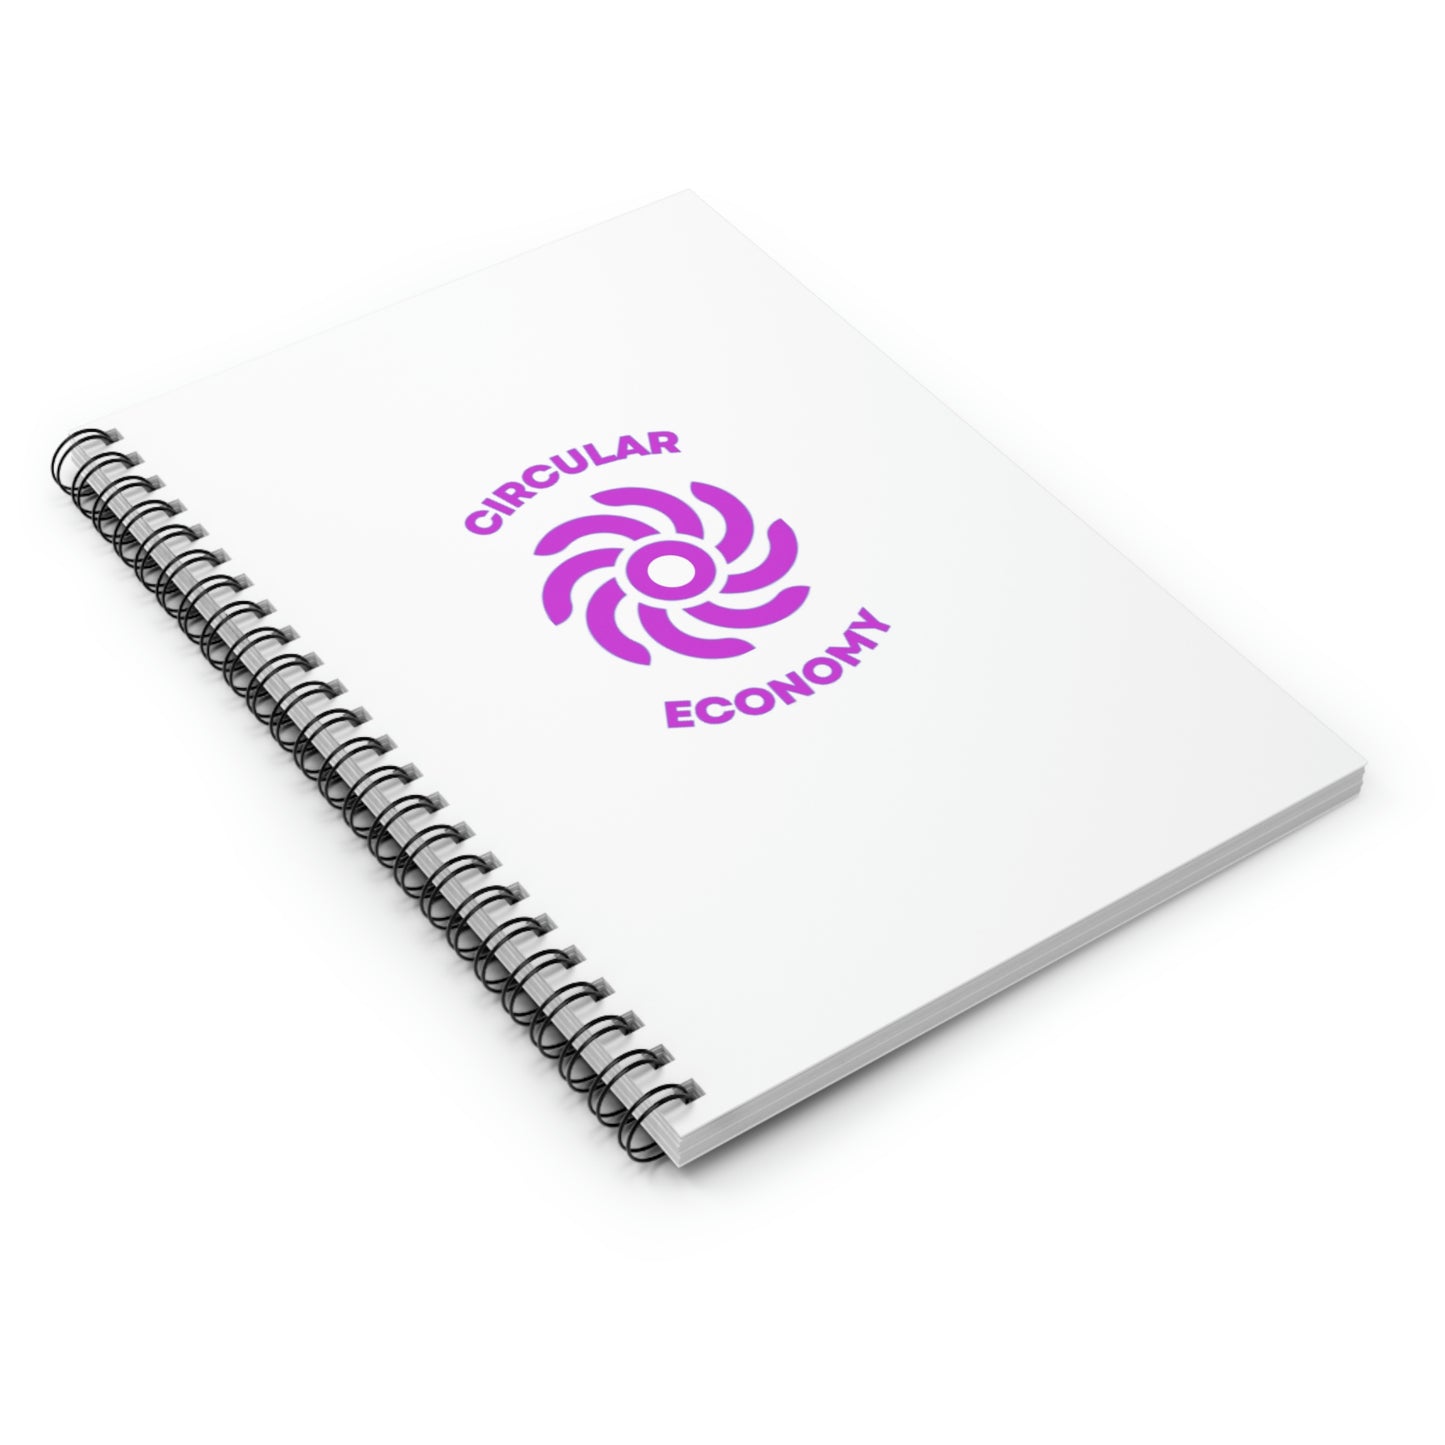 CIRCULAR ECONOMY - Spiral Notebook - Ruled Line - White Cover